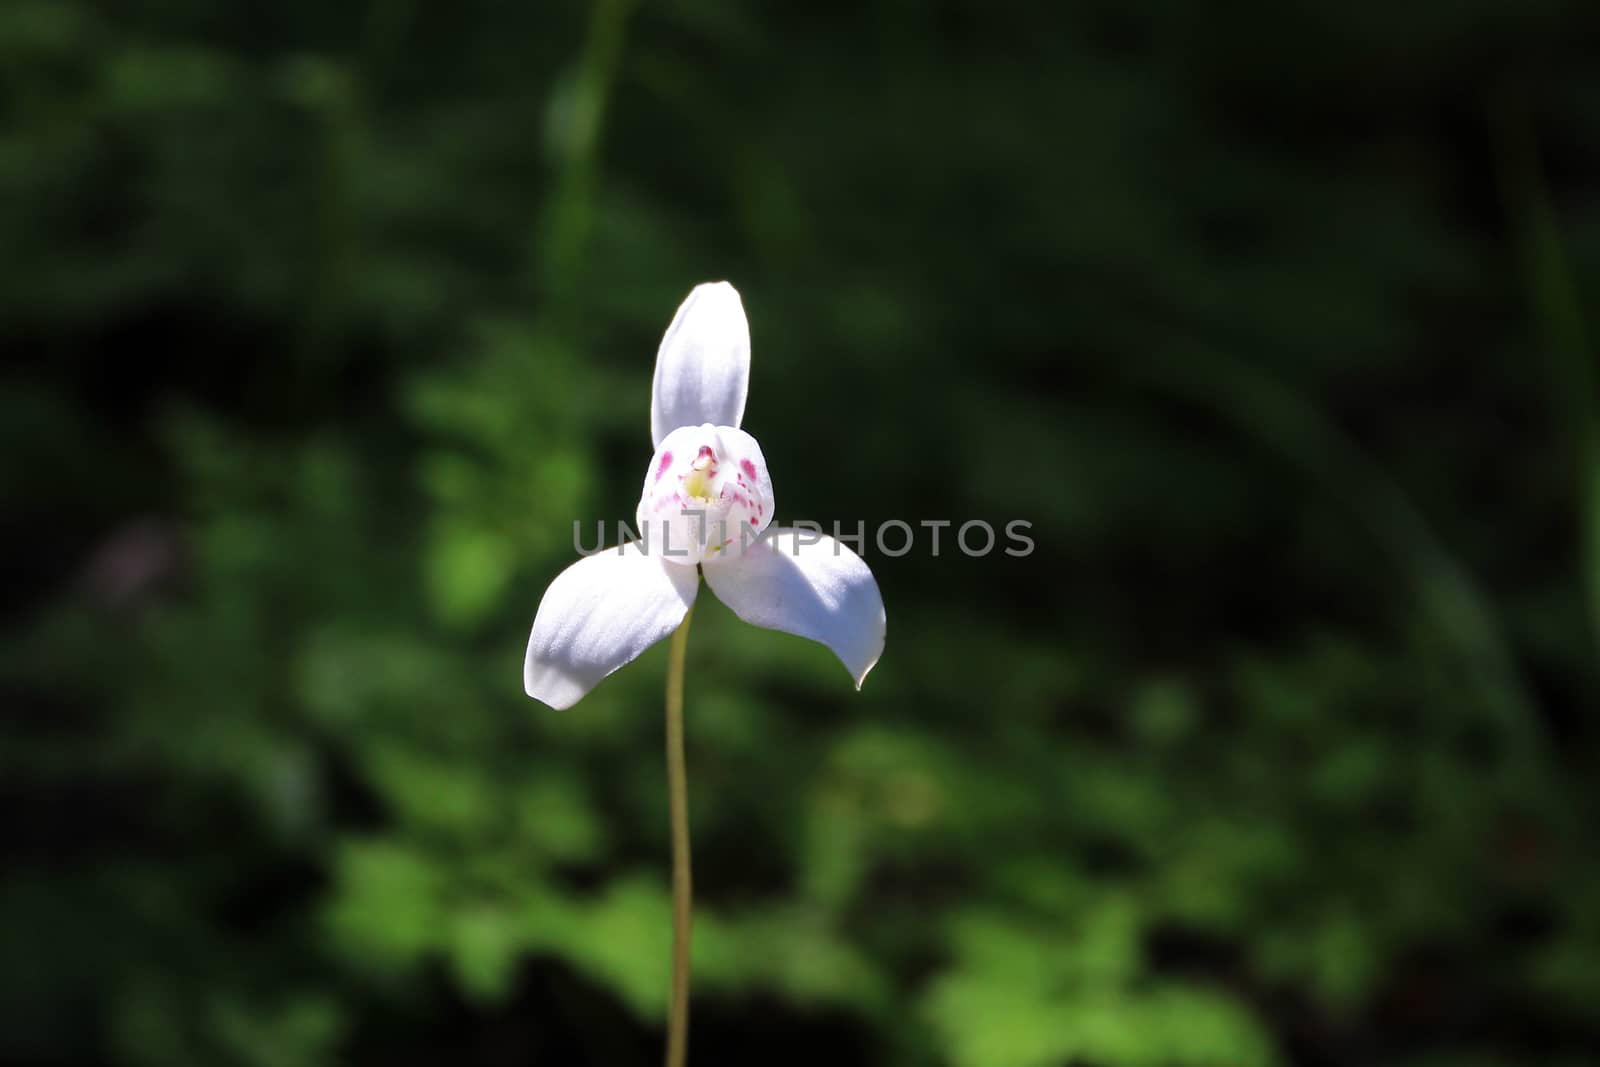 White Dog Orchid, codonorchis lessonii, Patagonia, Argentina by cicloco